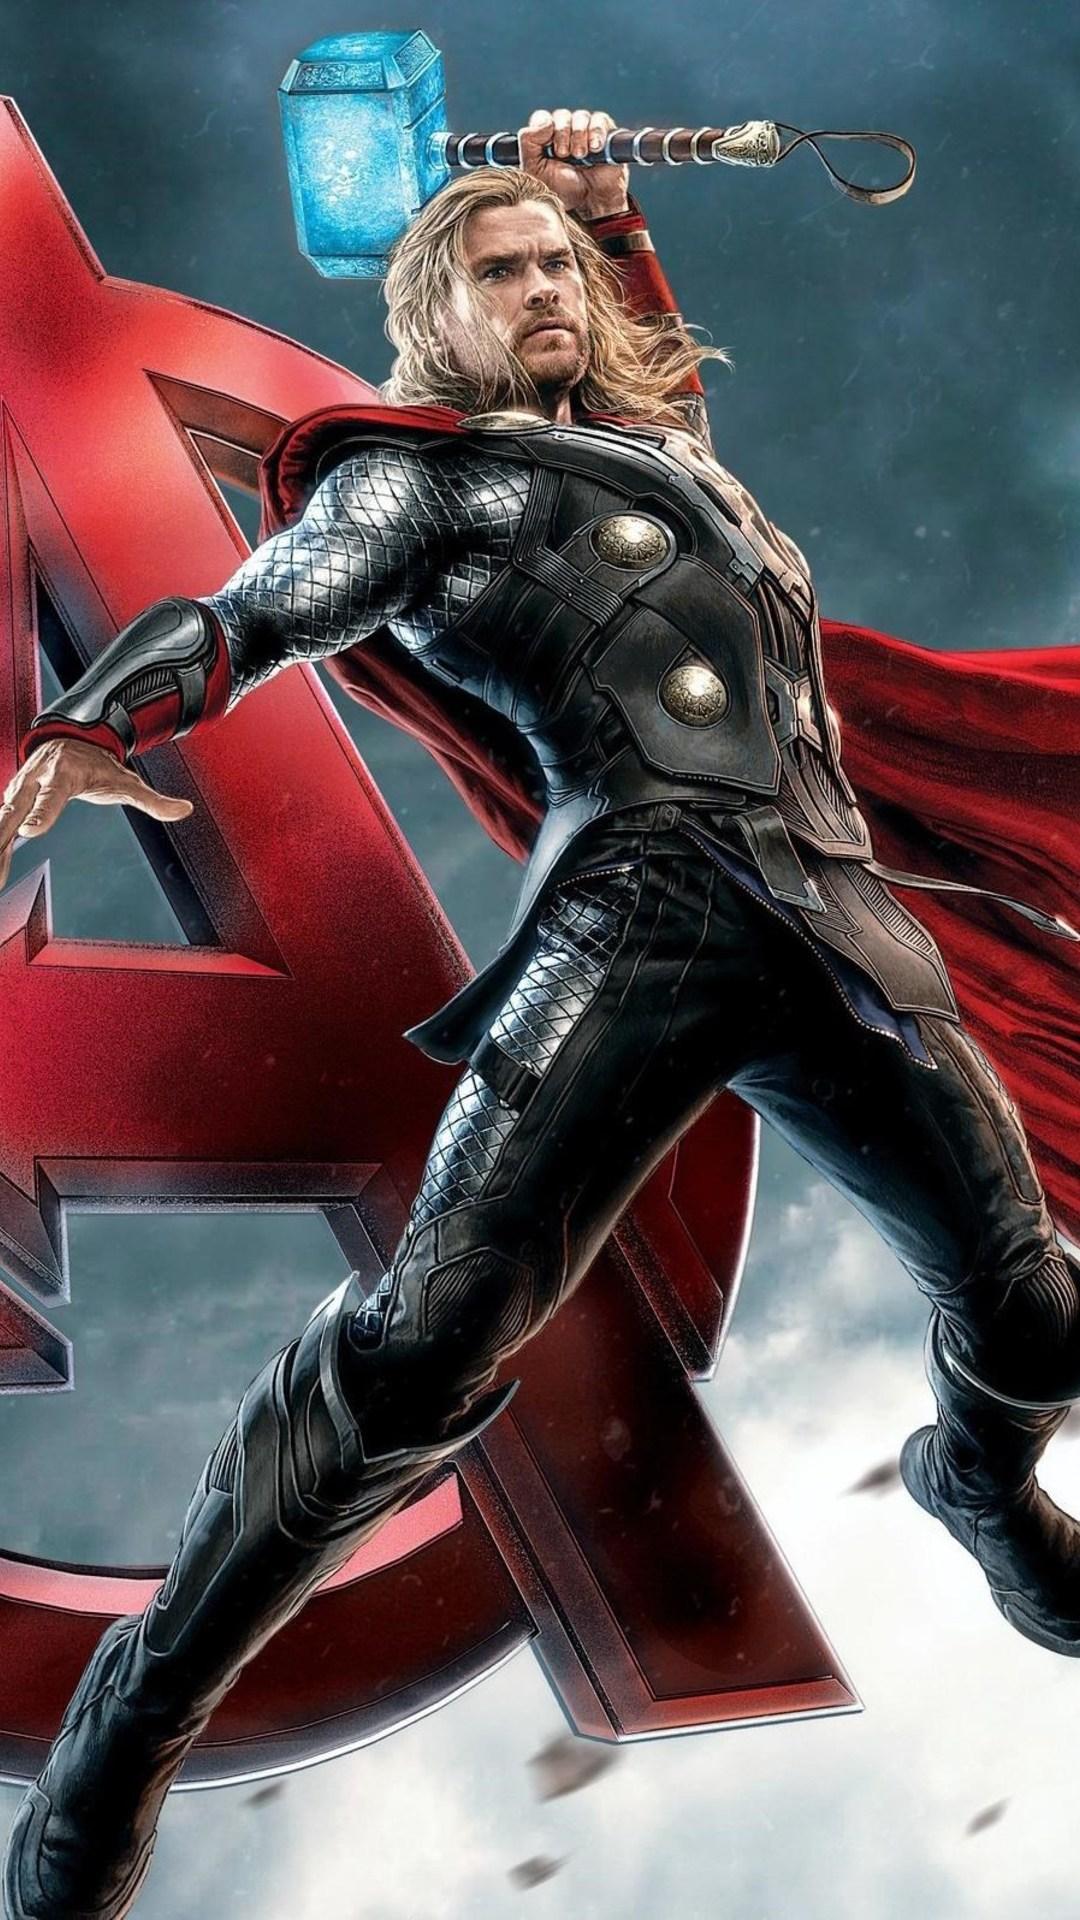 1080 x 1920 · jpeg - Thor Avengers | 4K wallpapers, free and easy to download